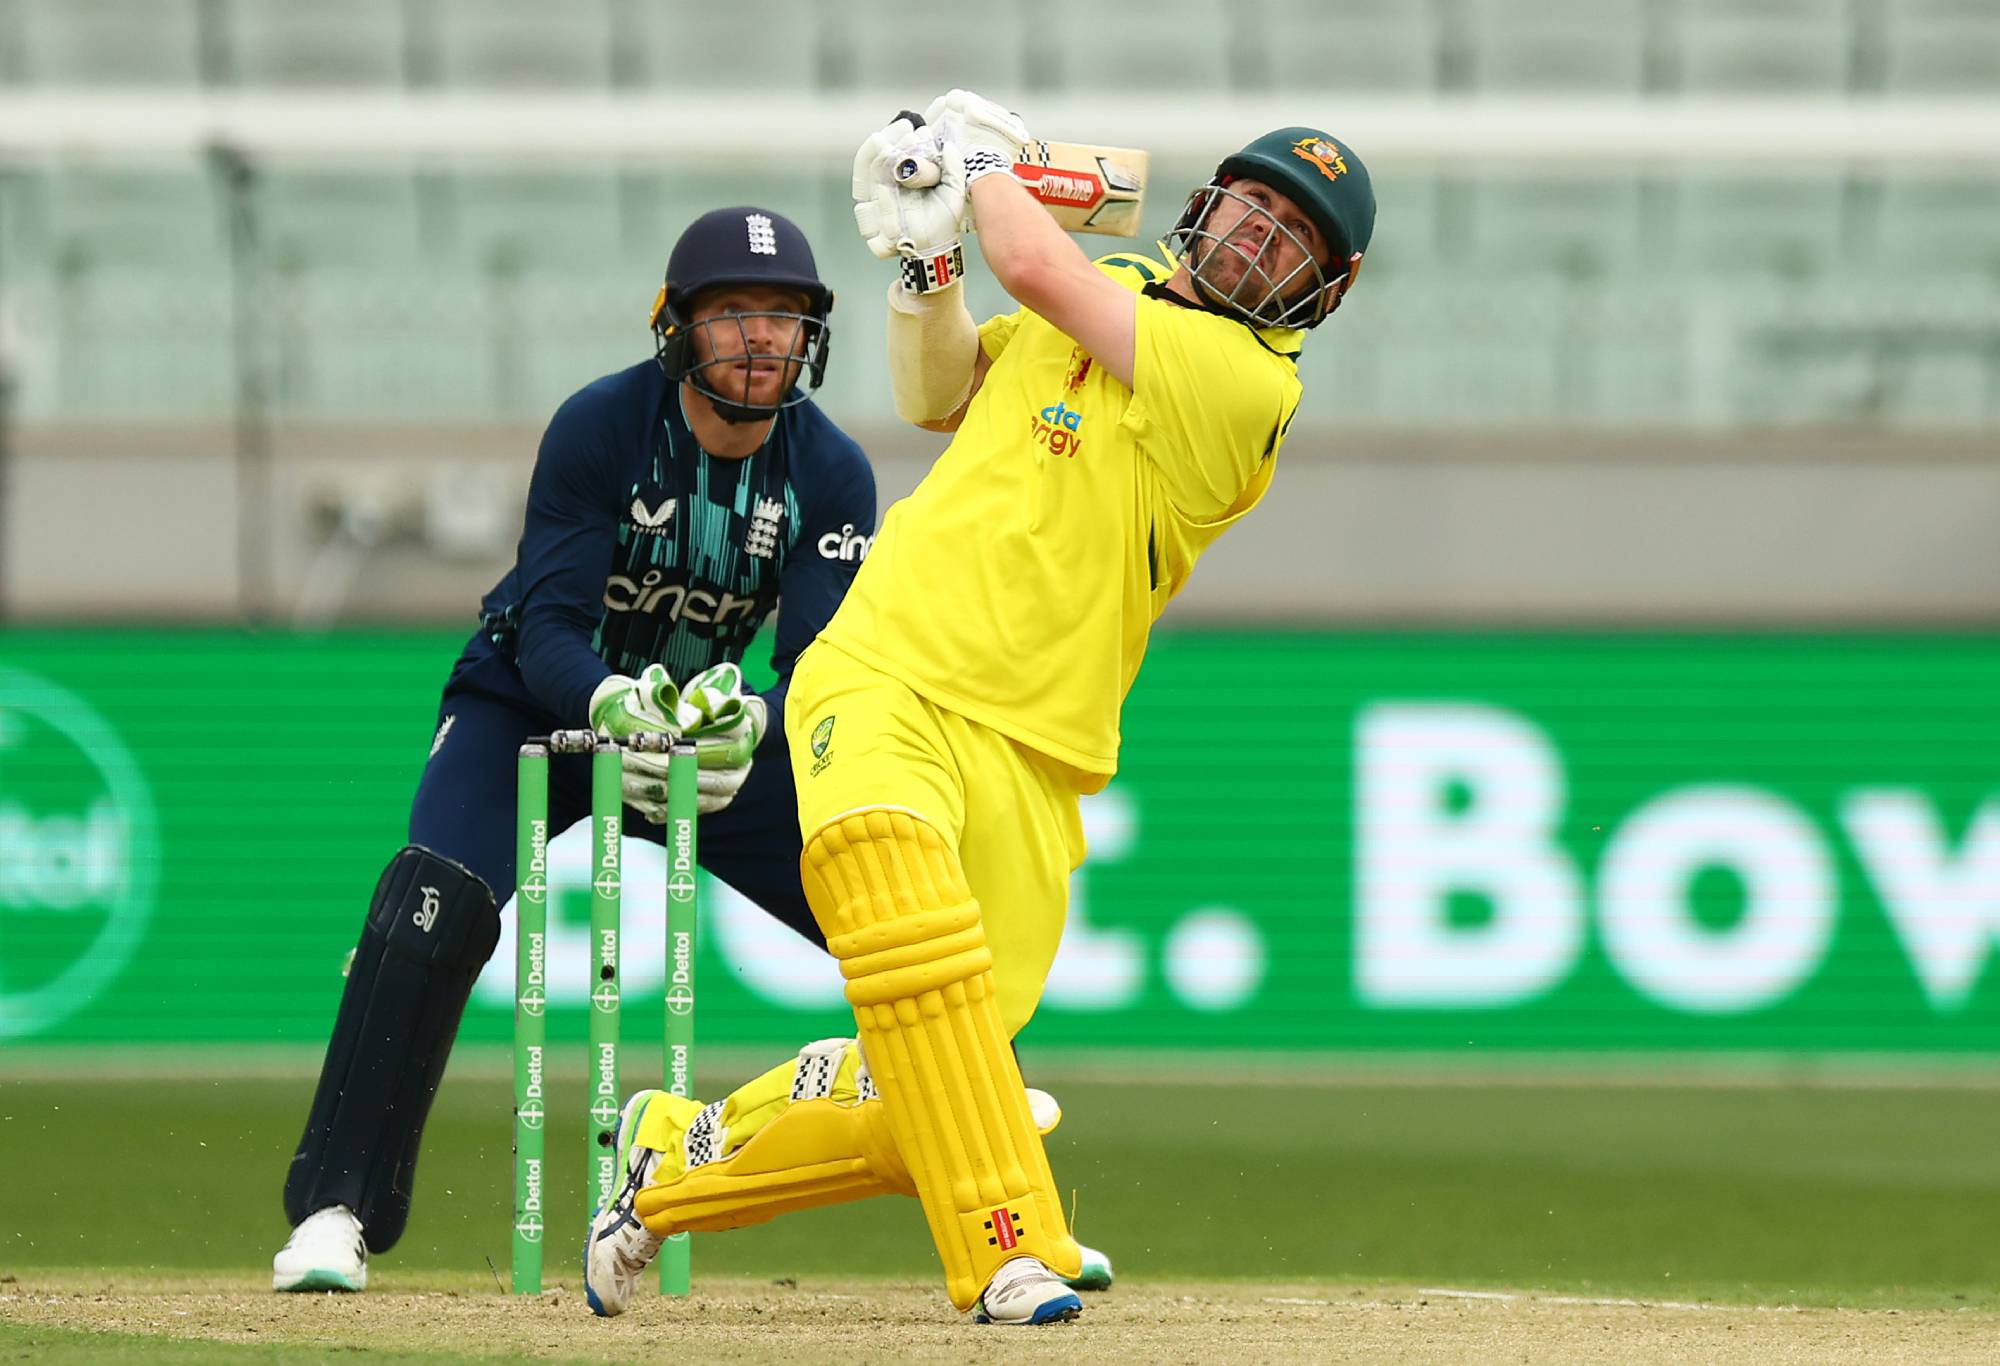 MELBOURNE, AUSTRALIA - NOVEMBER 22: Travis Head of Australia bats during game three of the One Day International series between Australia and England at Melbourne Cricket Ground on November 22, 2022 in Melbourne, Australia. (Photo by Graham Denholm - CA/Cricket Australia via Getty Images)